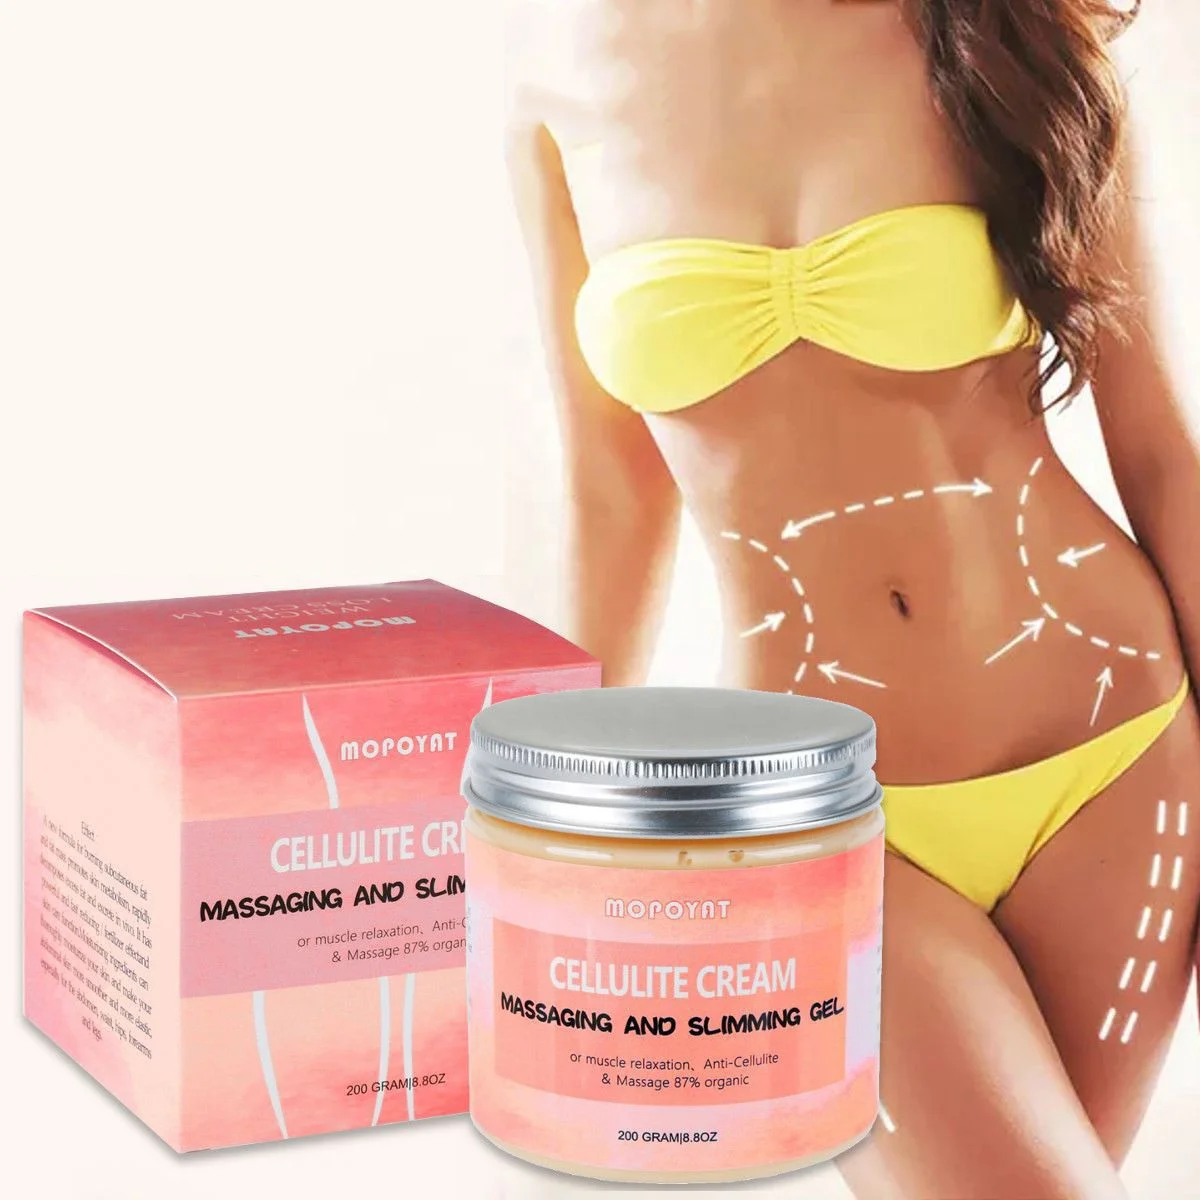 

Hot Sale Private Label Massage Anti Cellulite Losing Weight Fat Burning Cream Body Slimming Gel, White